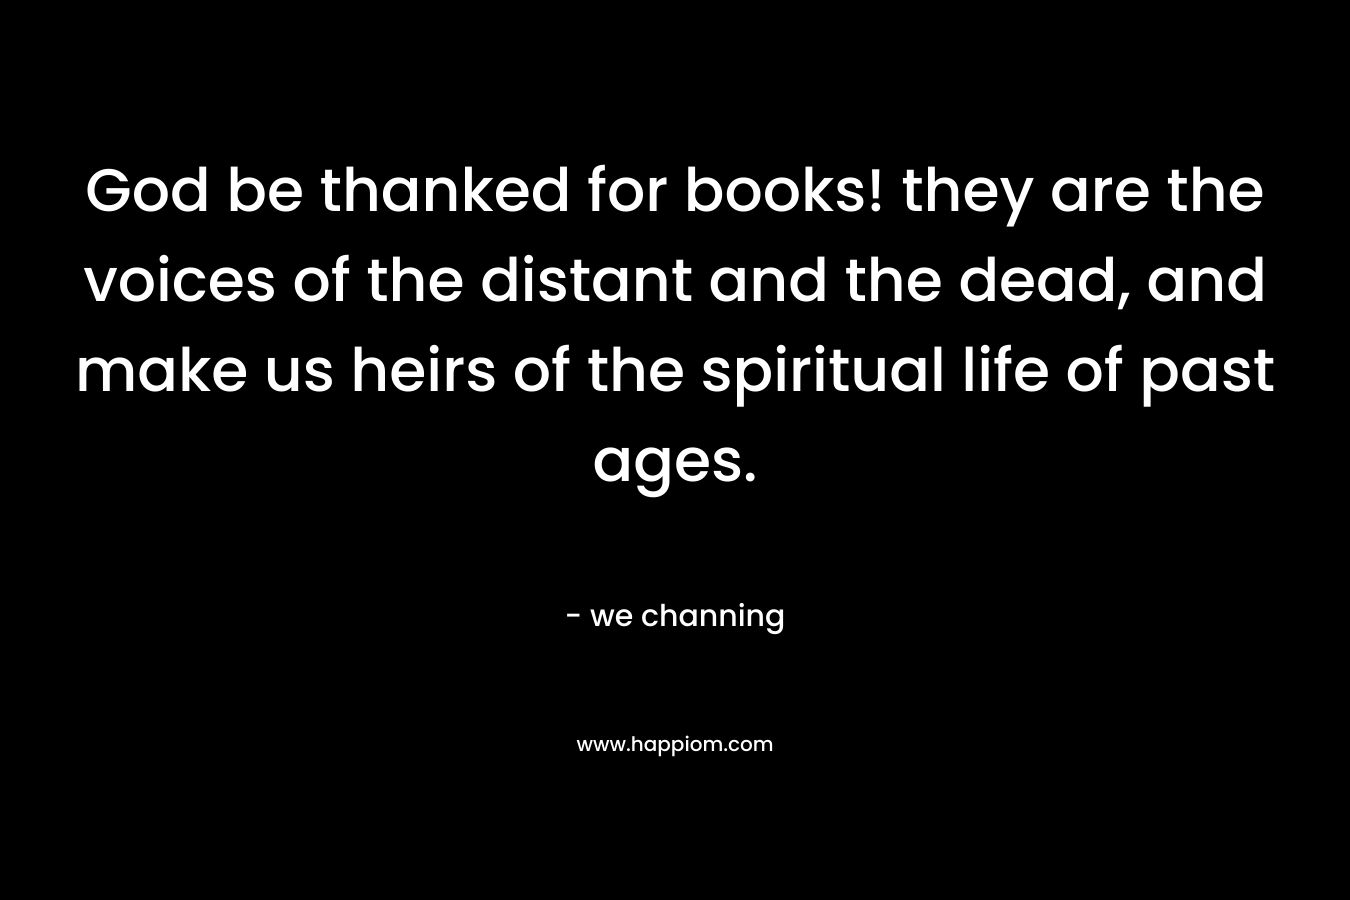 God be thanked for books! they are the voices of the distant and the dead, and make us heirs of the spiritual life of past ages.